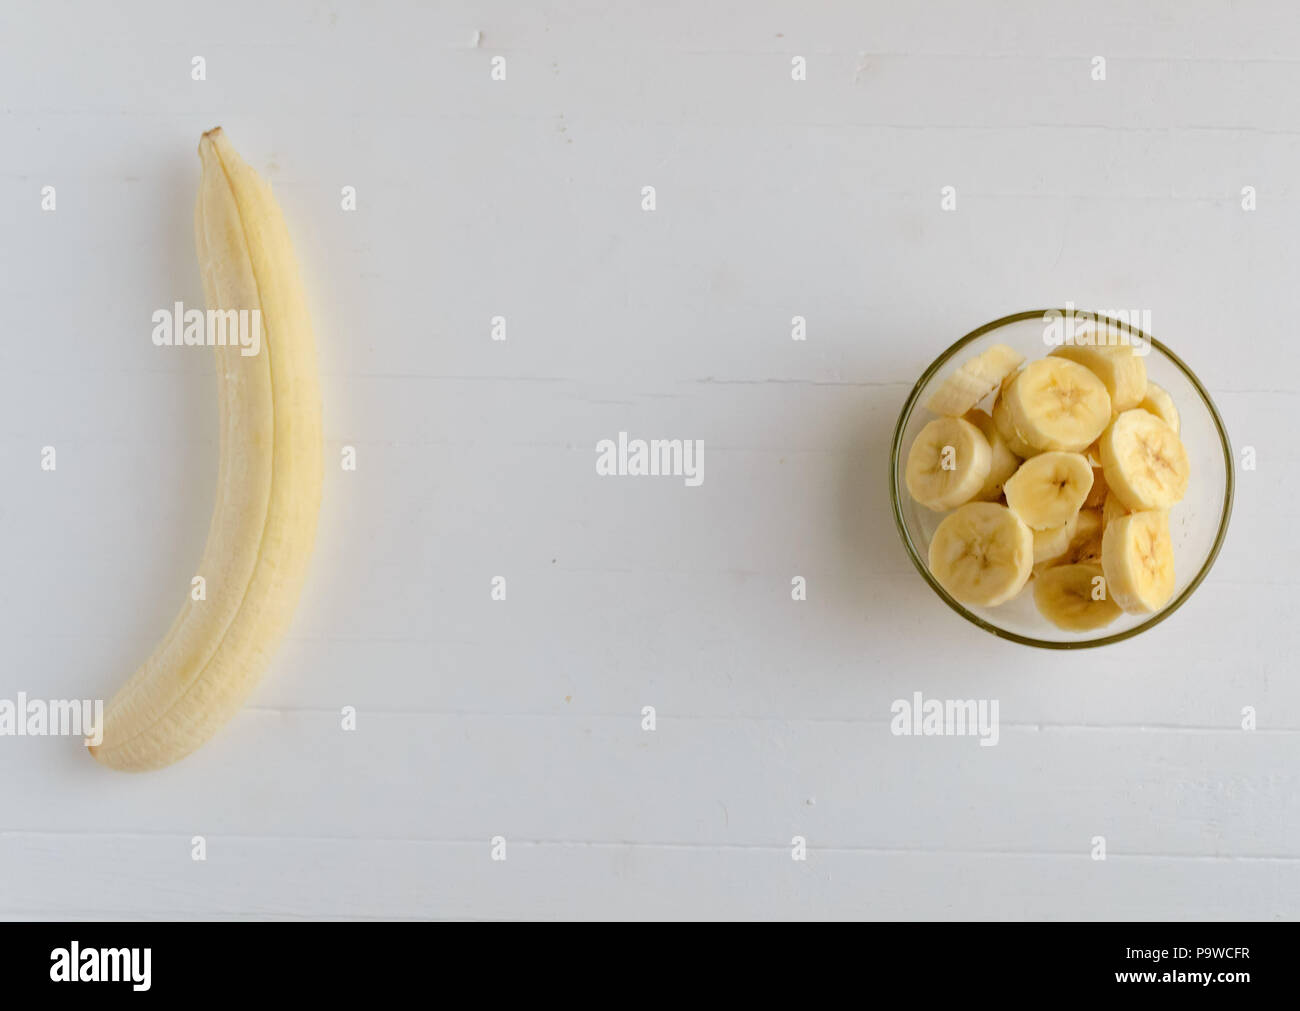 A peeled banana and a fresh ripe organic sliced bananas in a glass bowl on a white wooden background.Copyspace middle. Stock Photo